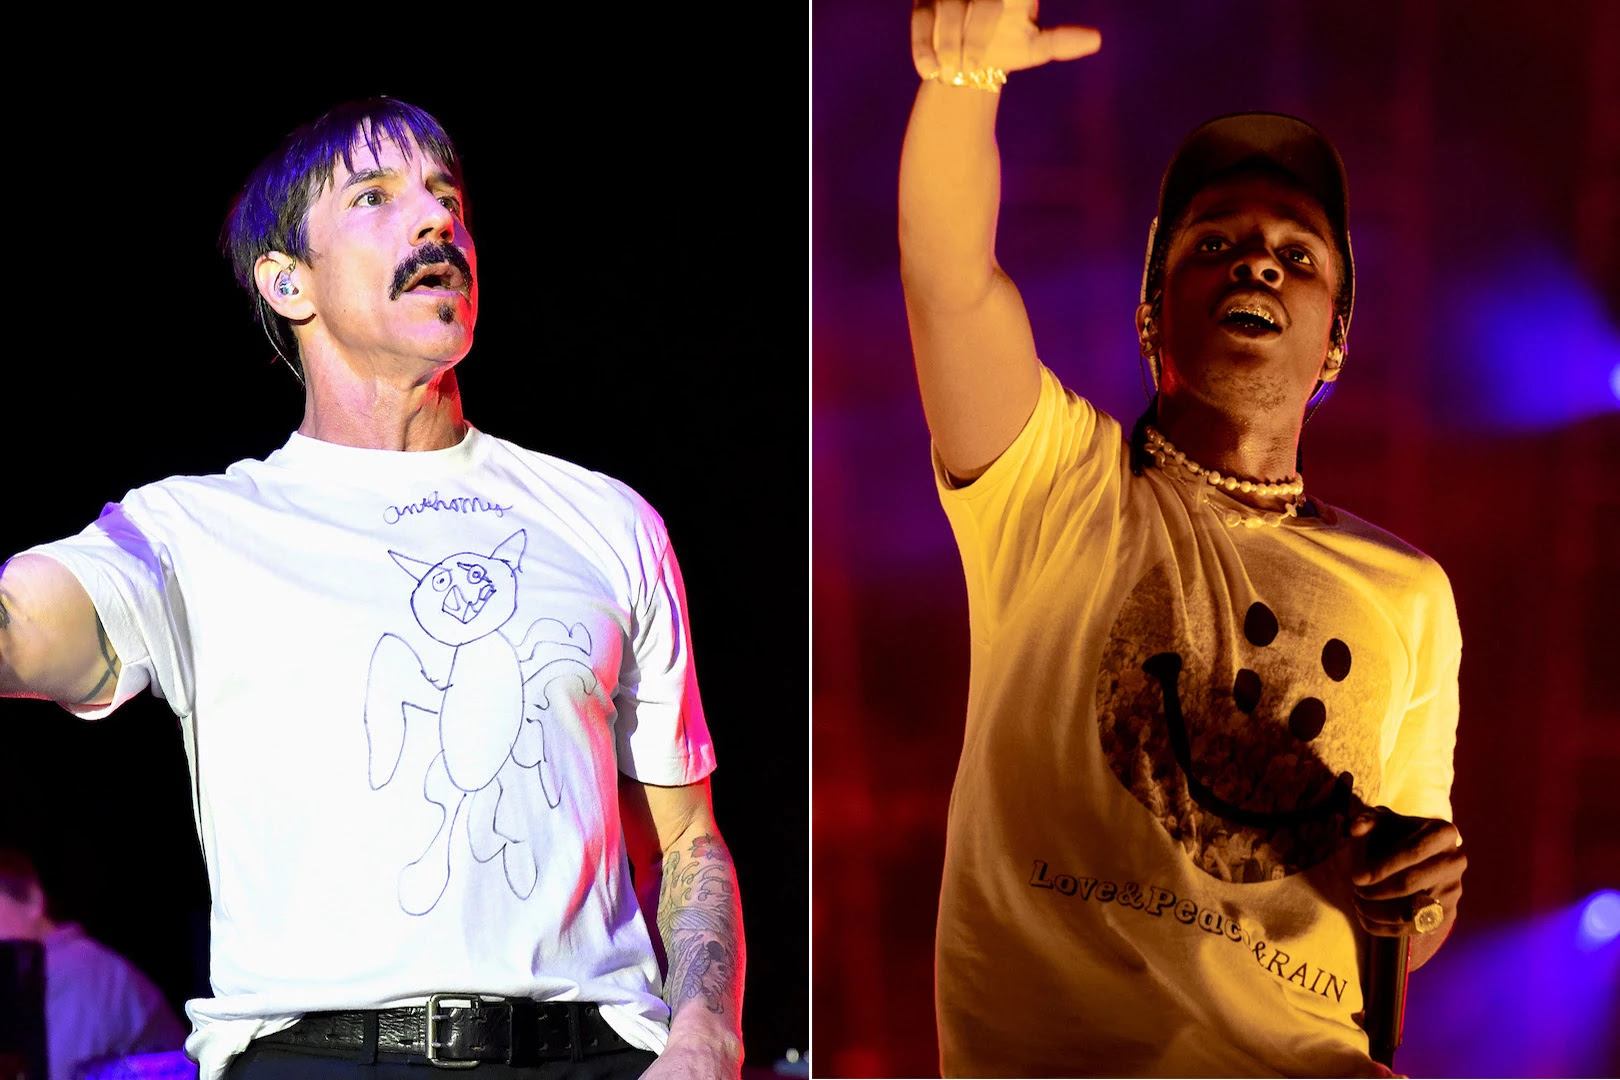 RHCP End Up Supporting ASAP Rocky After He Arrives Late to Show